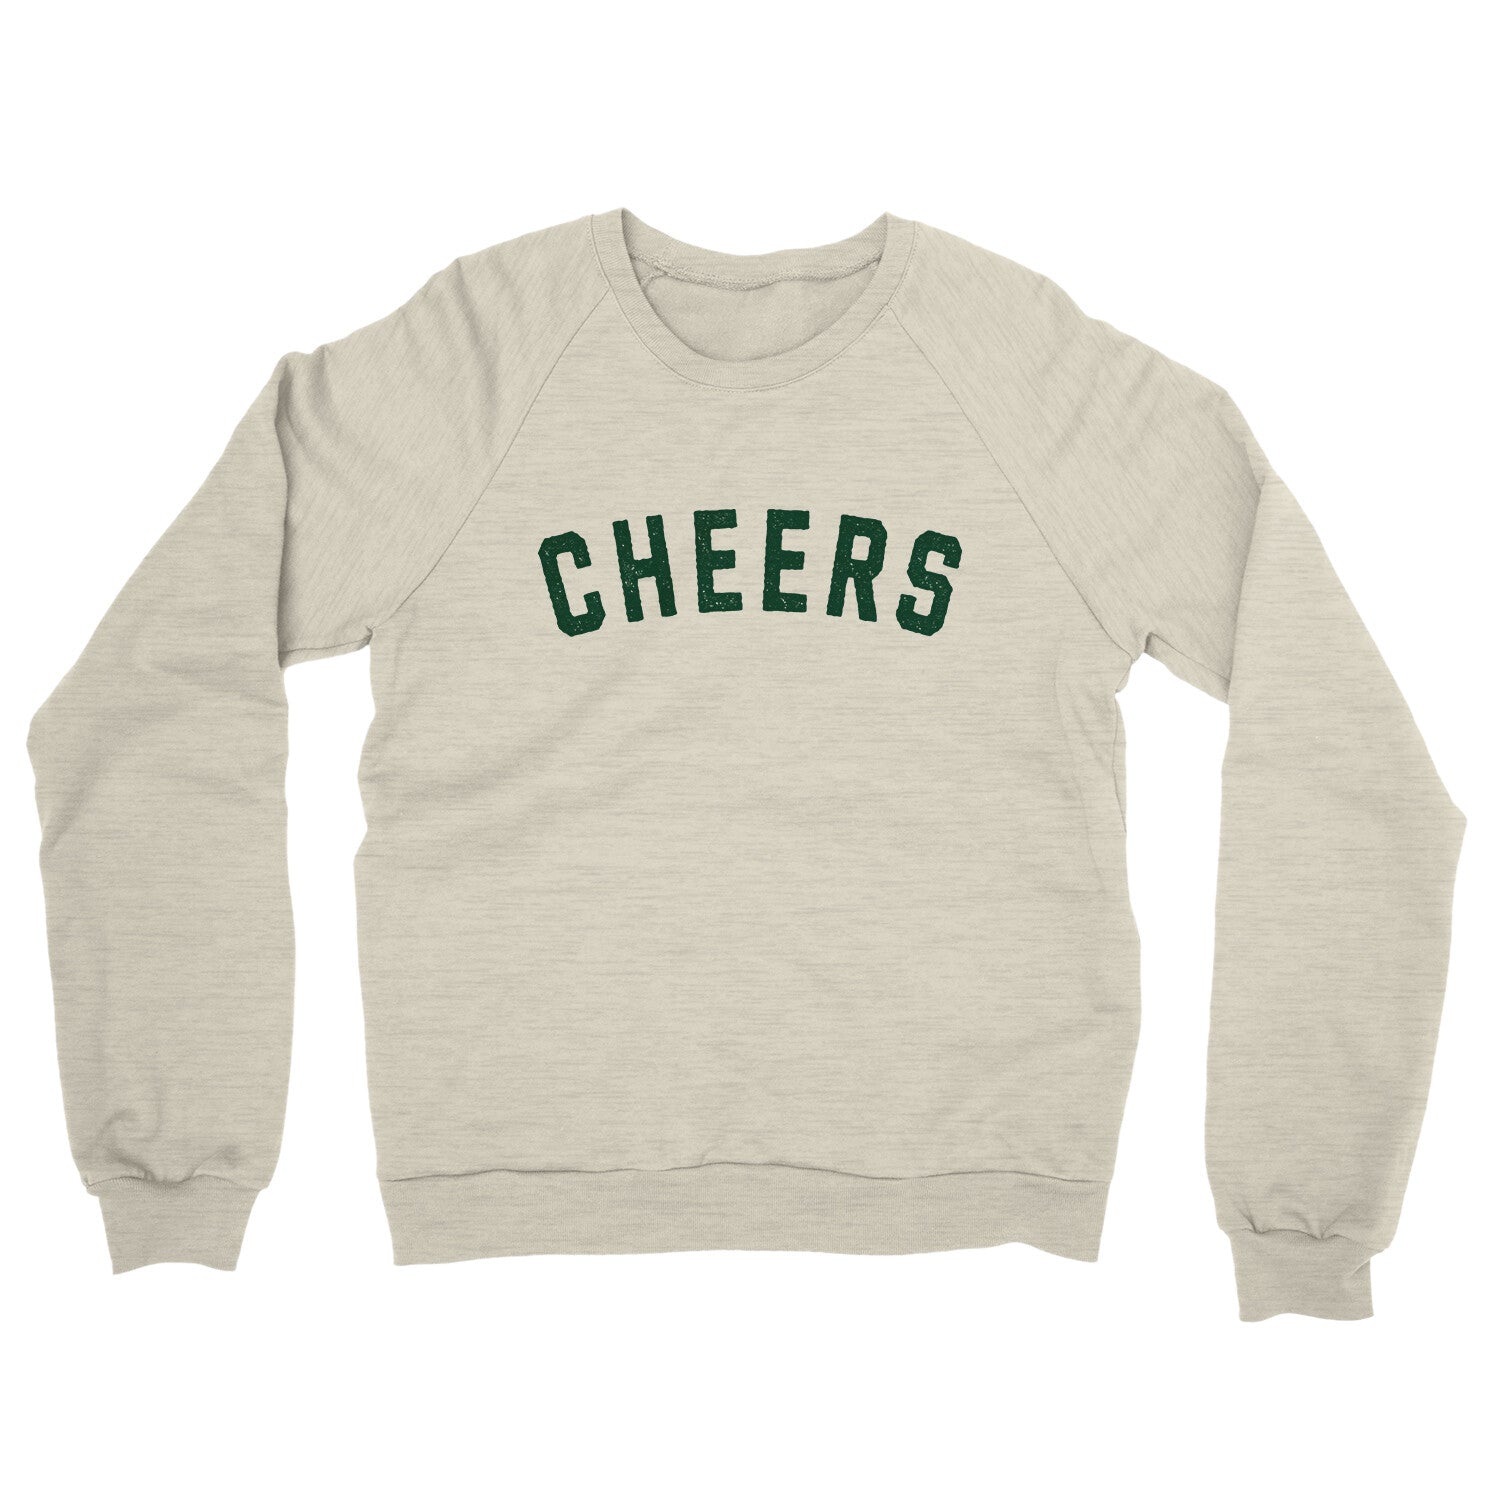 Cheers in Heather Oatmeal Color